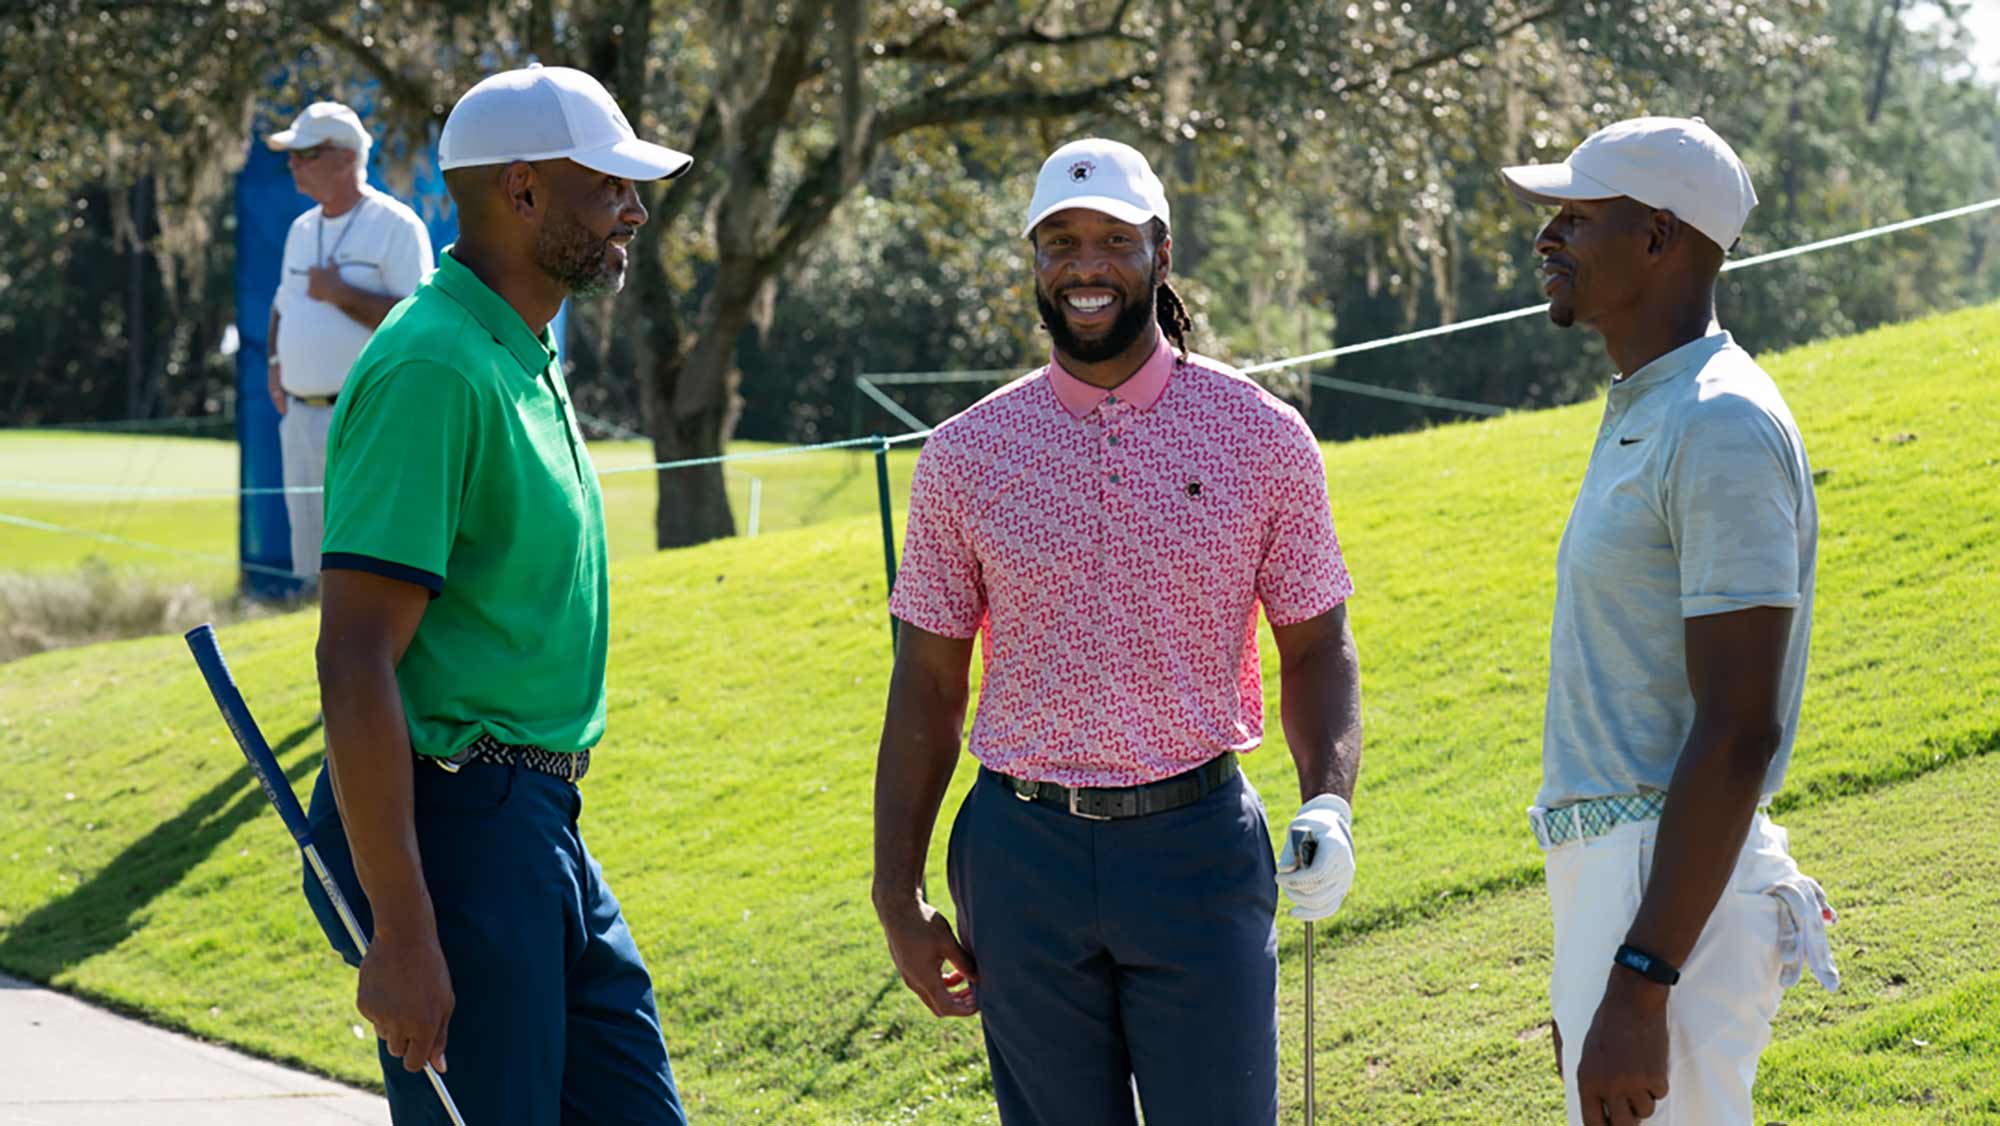 Grant Hill, Larry Fitzgerald and Ray Allen chat during the opening round of the Diamond Resorts Tournament of Champions presented by Insurance Office of America on January 16, 2020